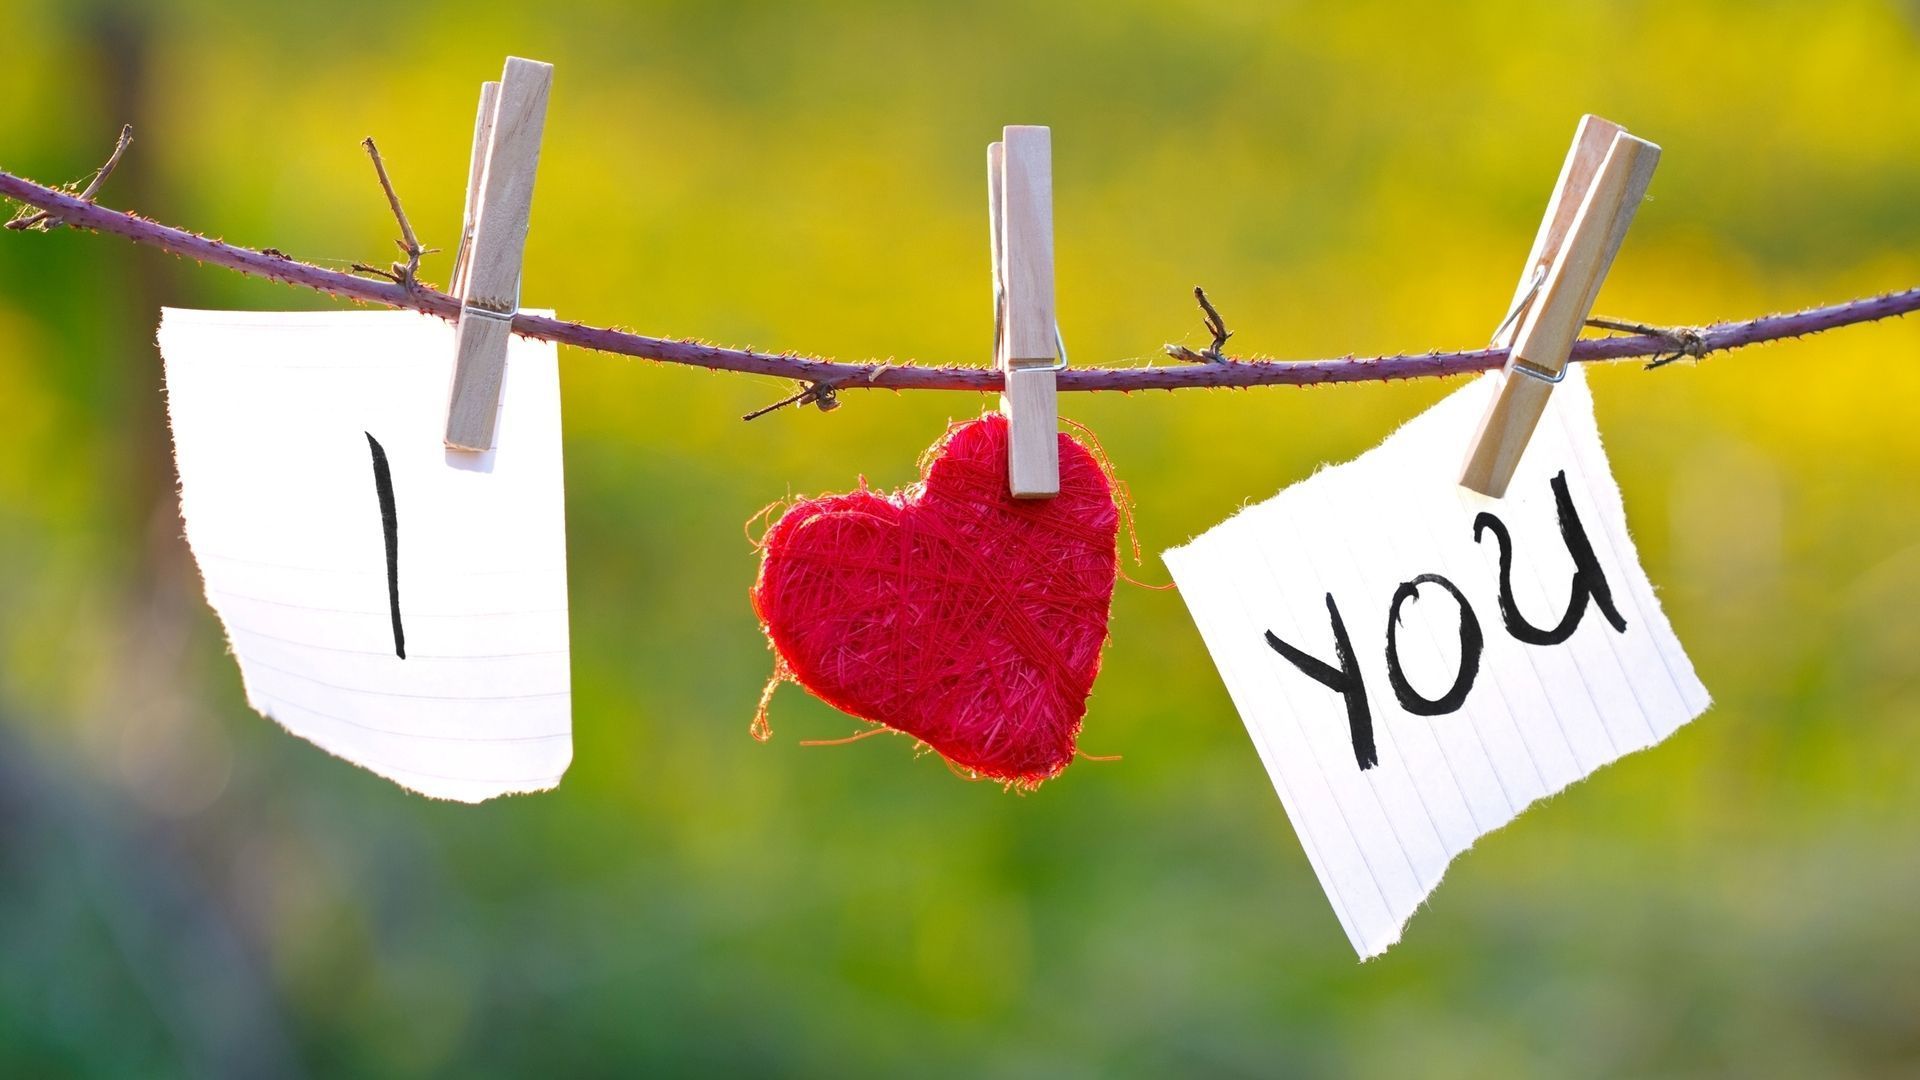 I Love You HD Images Wallpapers | I Love You Free Download Images ...